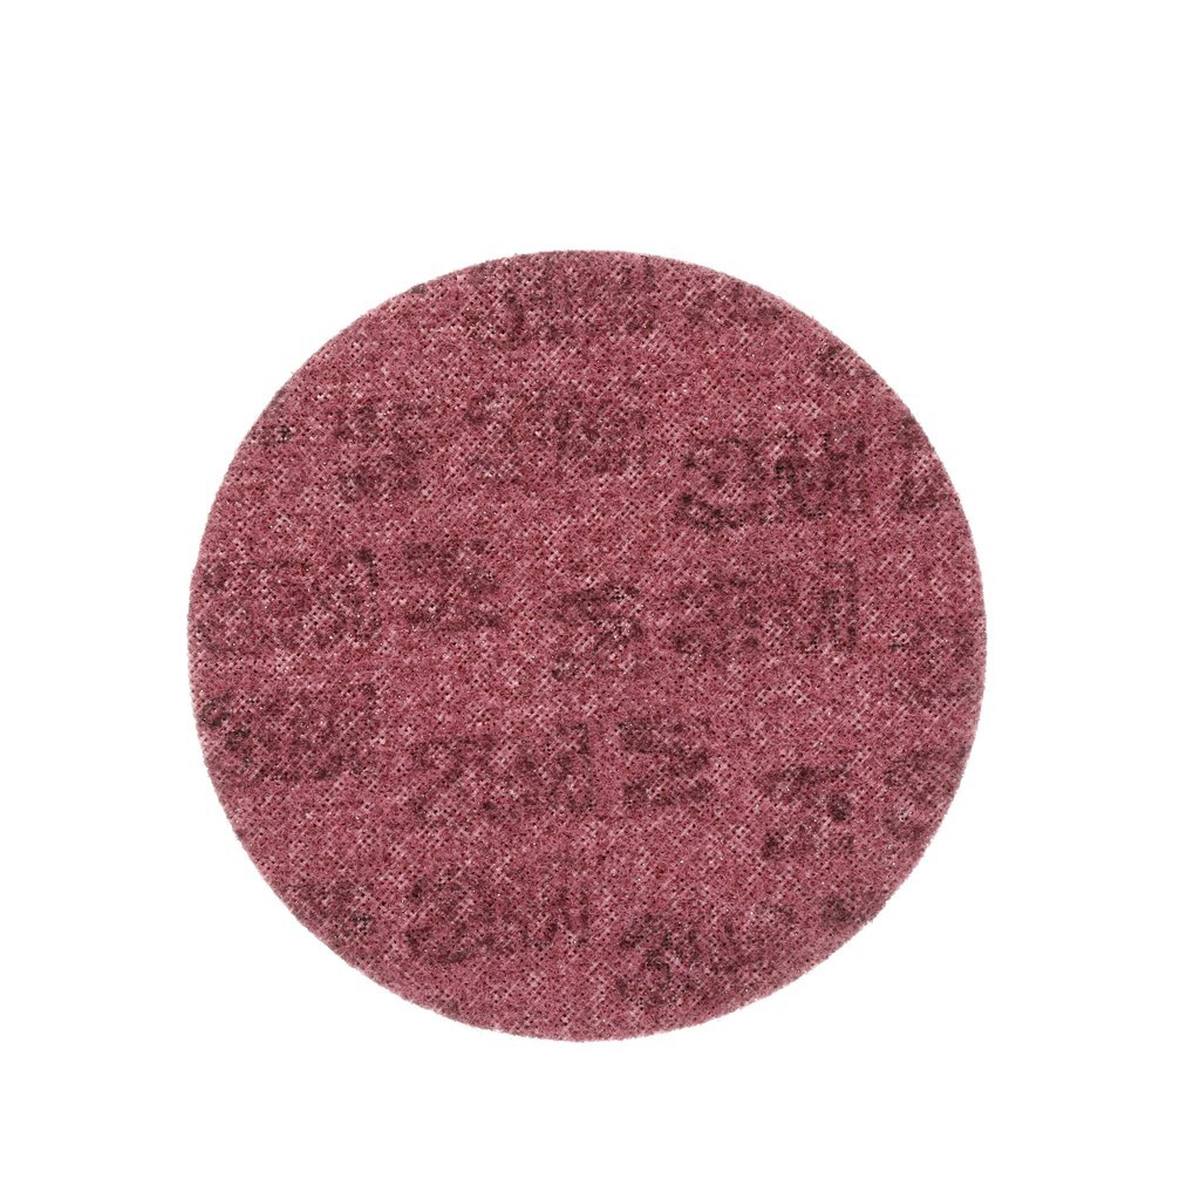 3M Scotch-Brite Non-woven disc SC-DH without centring, red, 115 mm, A, medium #65335